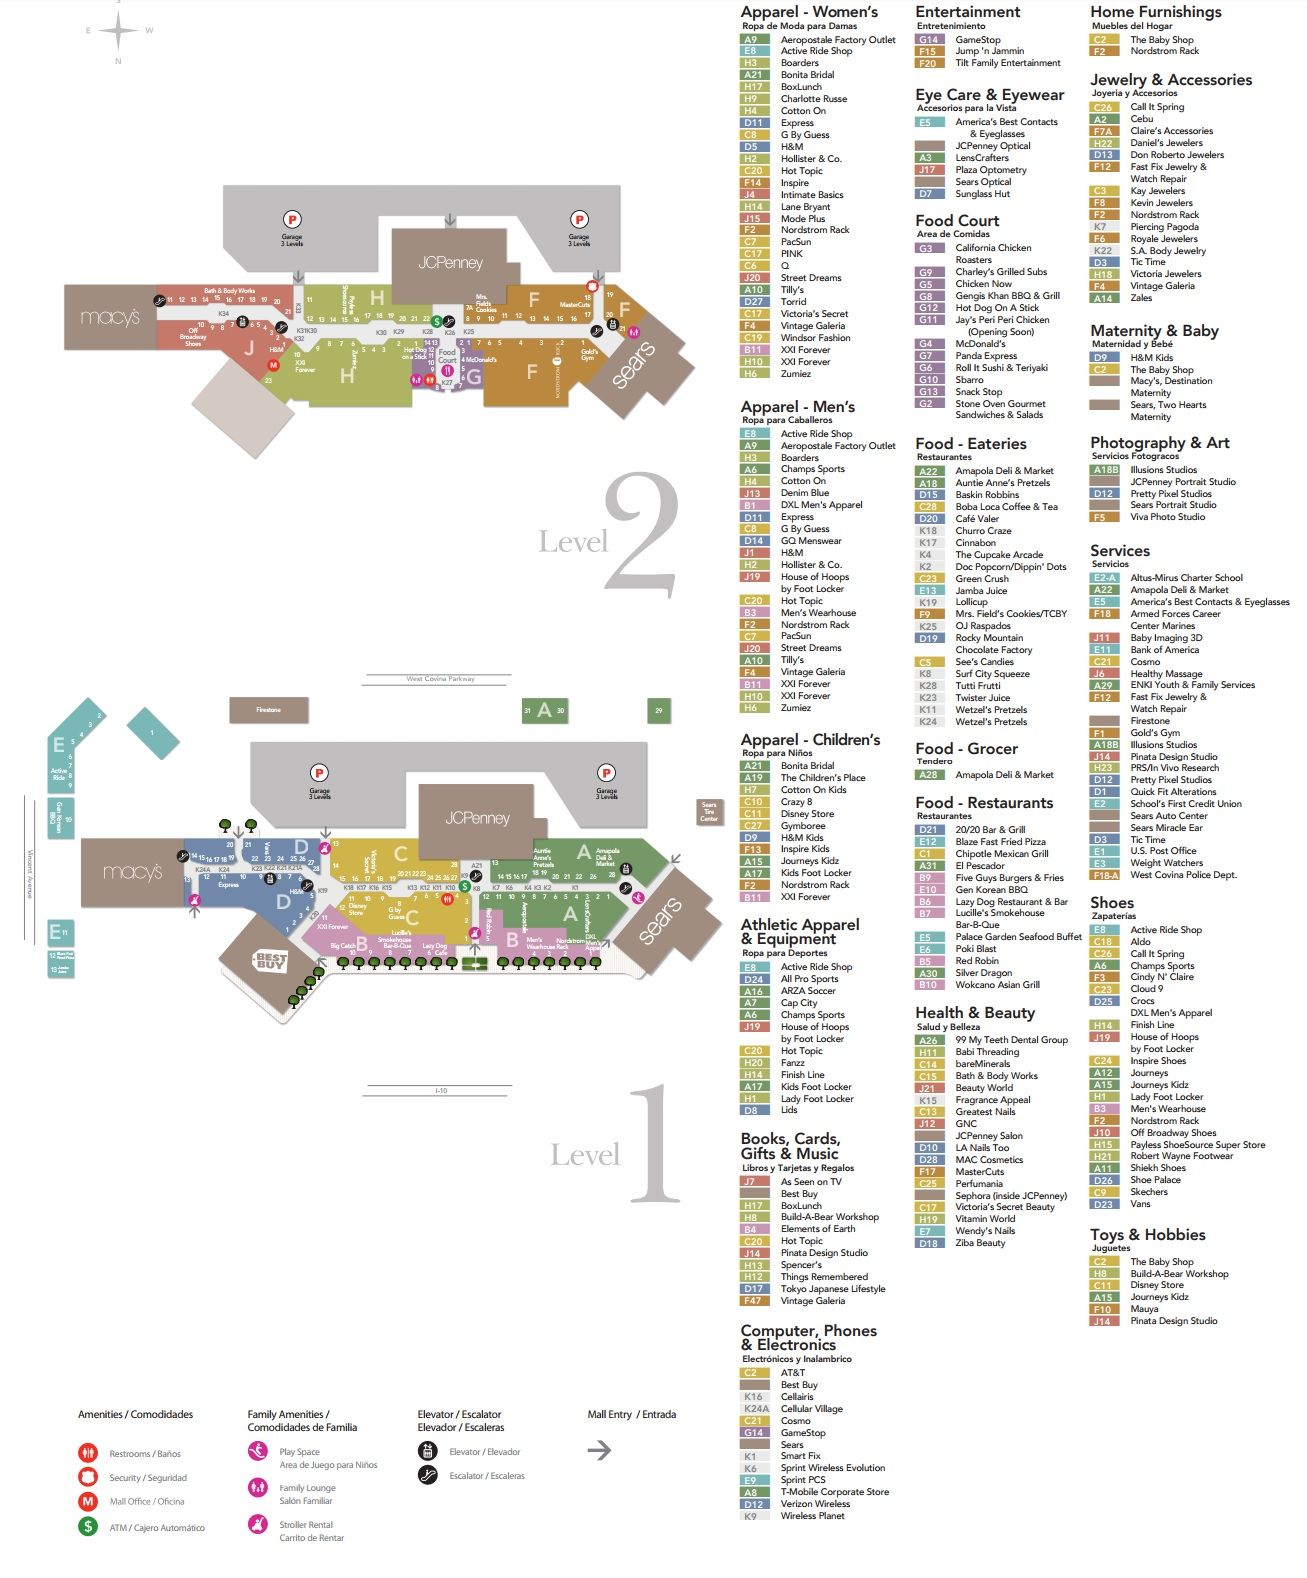 Garden State Plaza Directory Map 